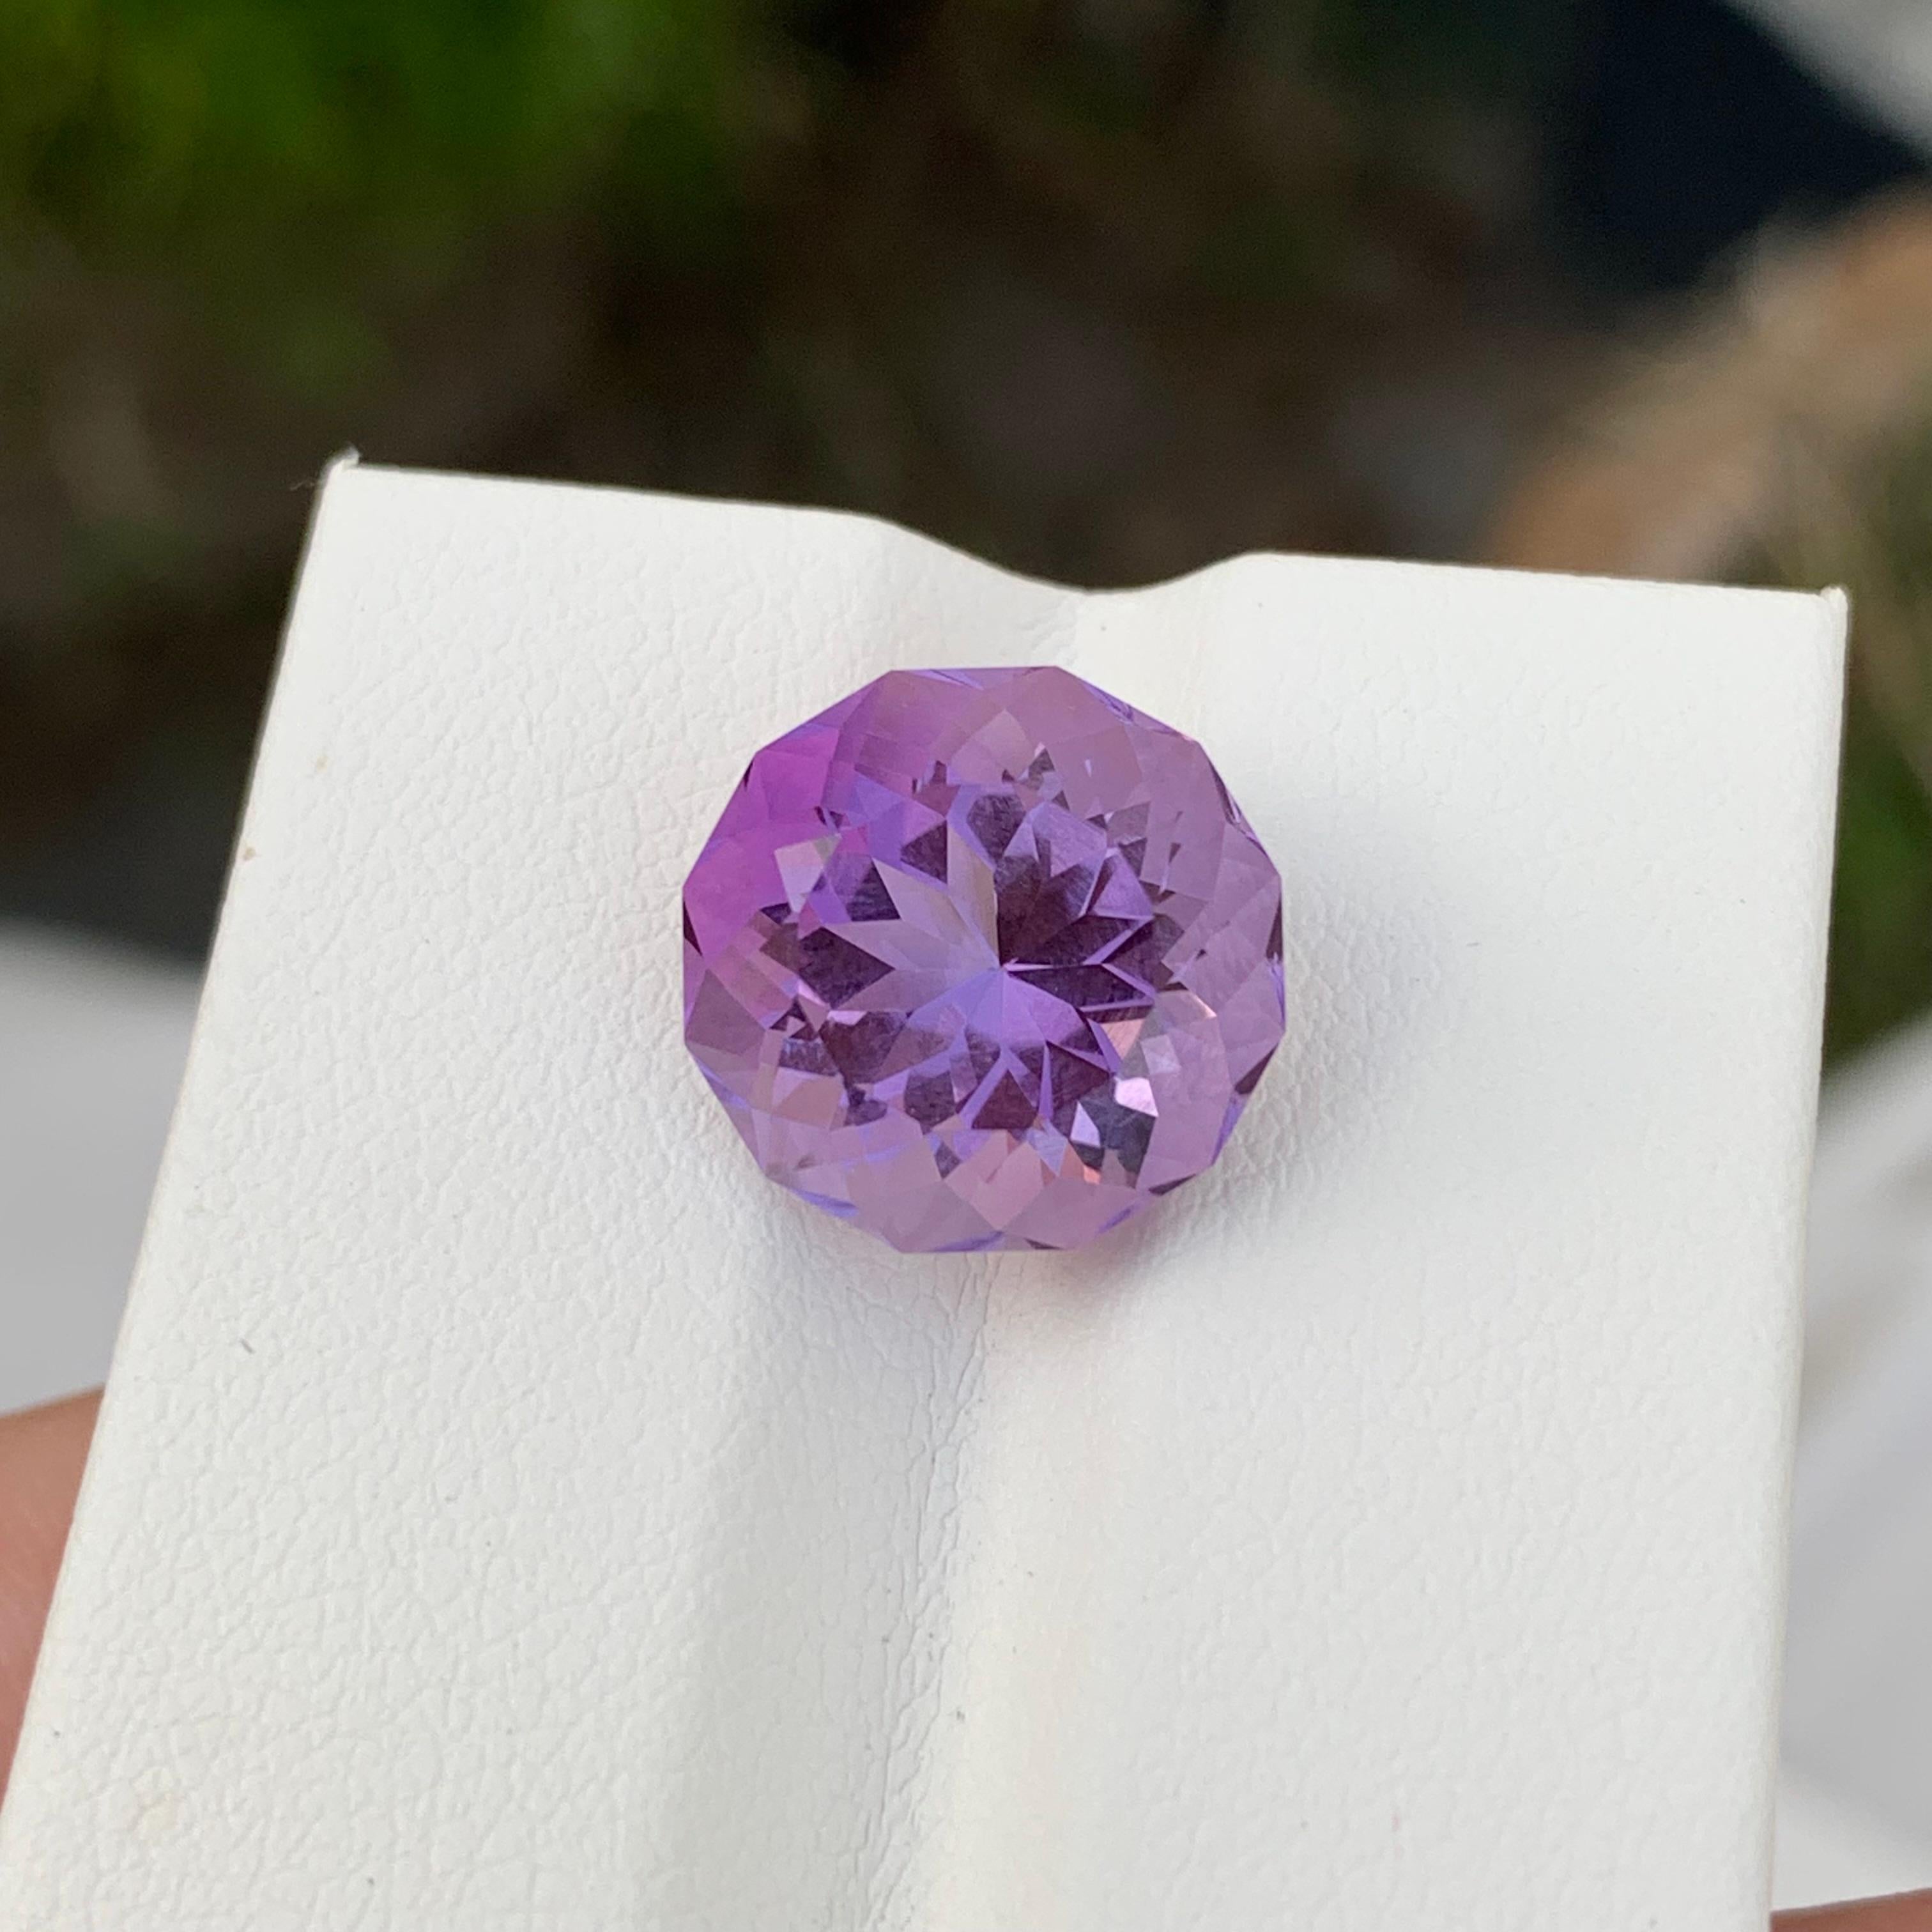 Loose Amethyst
Weight: 6.65 Carats
Dimension: 12.1 x 12.1 x 8.8 Mm
Colour: Purple
Origin: Brazil
Treatment: Non
Certificate: On Demand
Shape: Round 

Amethyst, a stunning variety of quartz known for its mesmerizing purple hue, has captivated humans